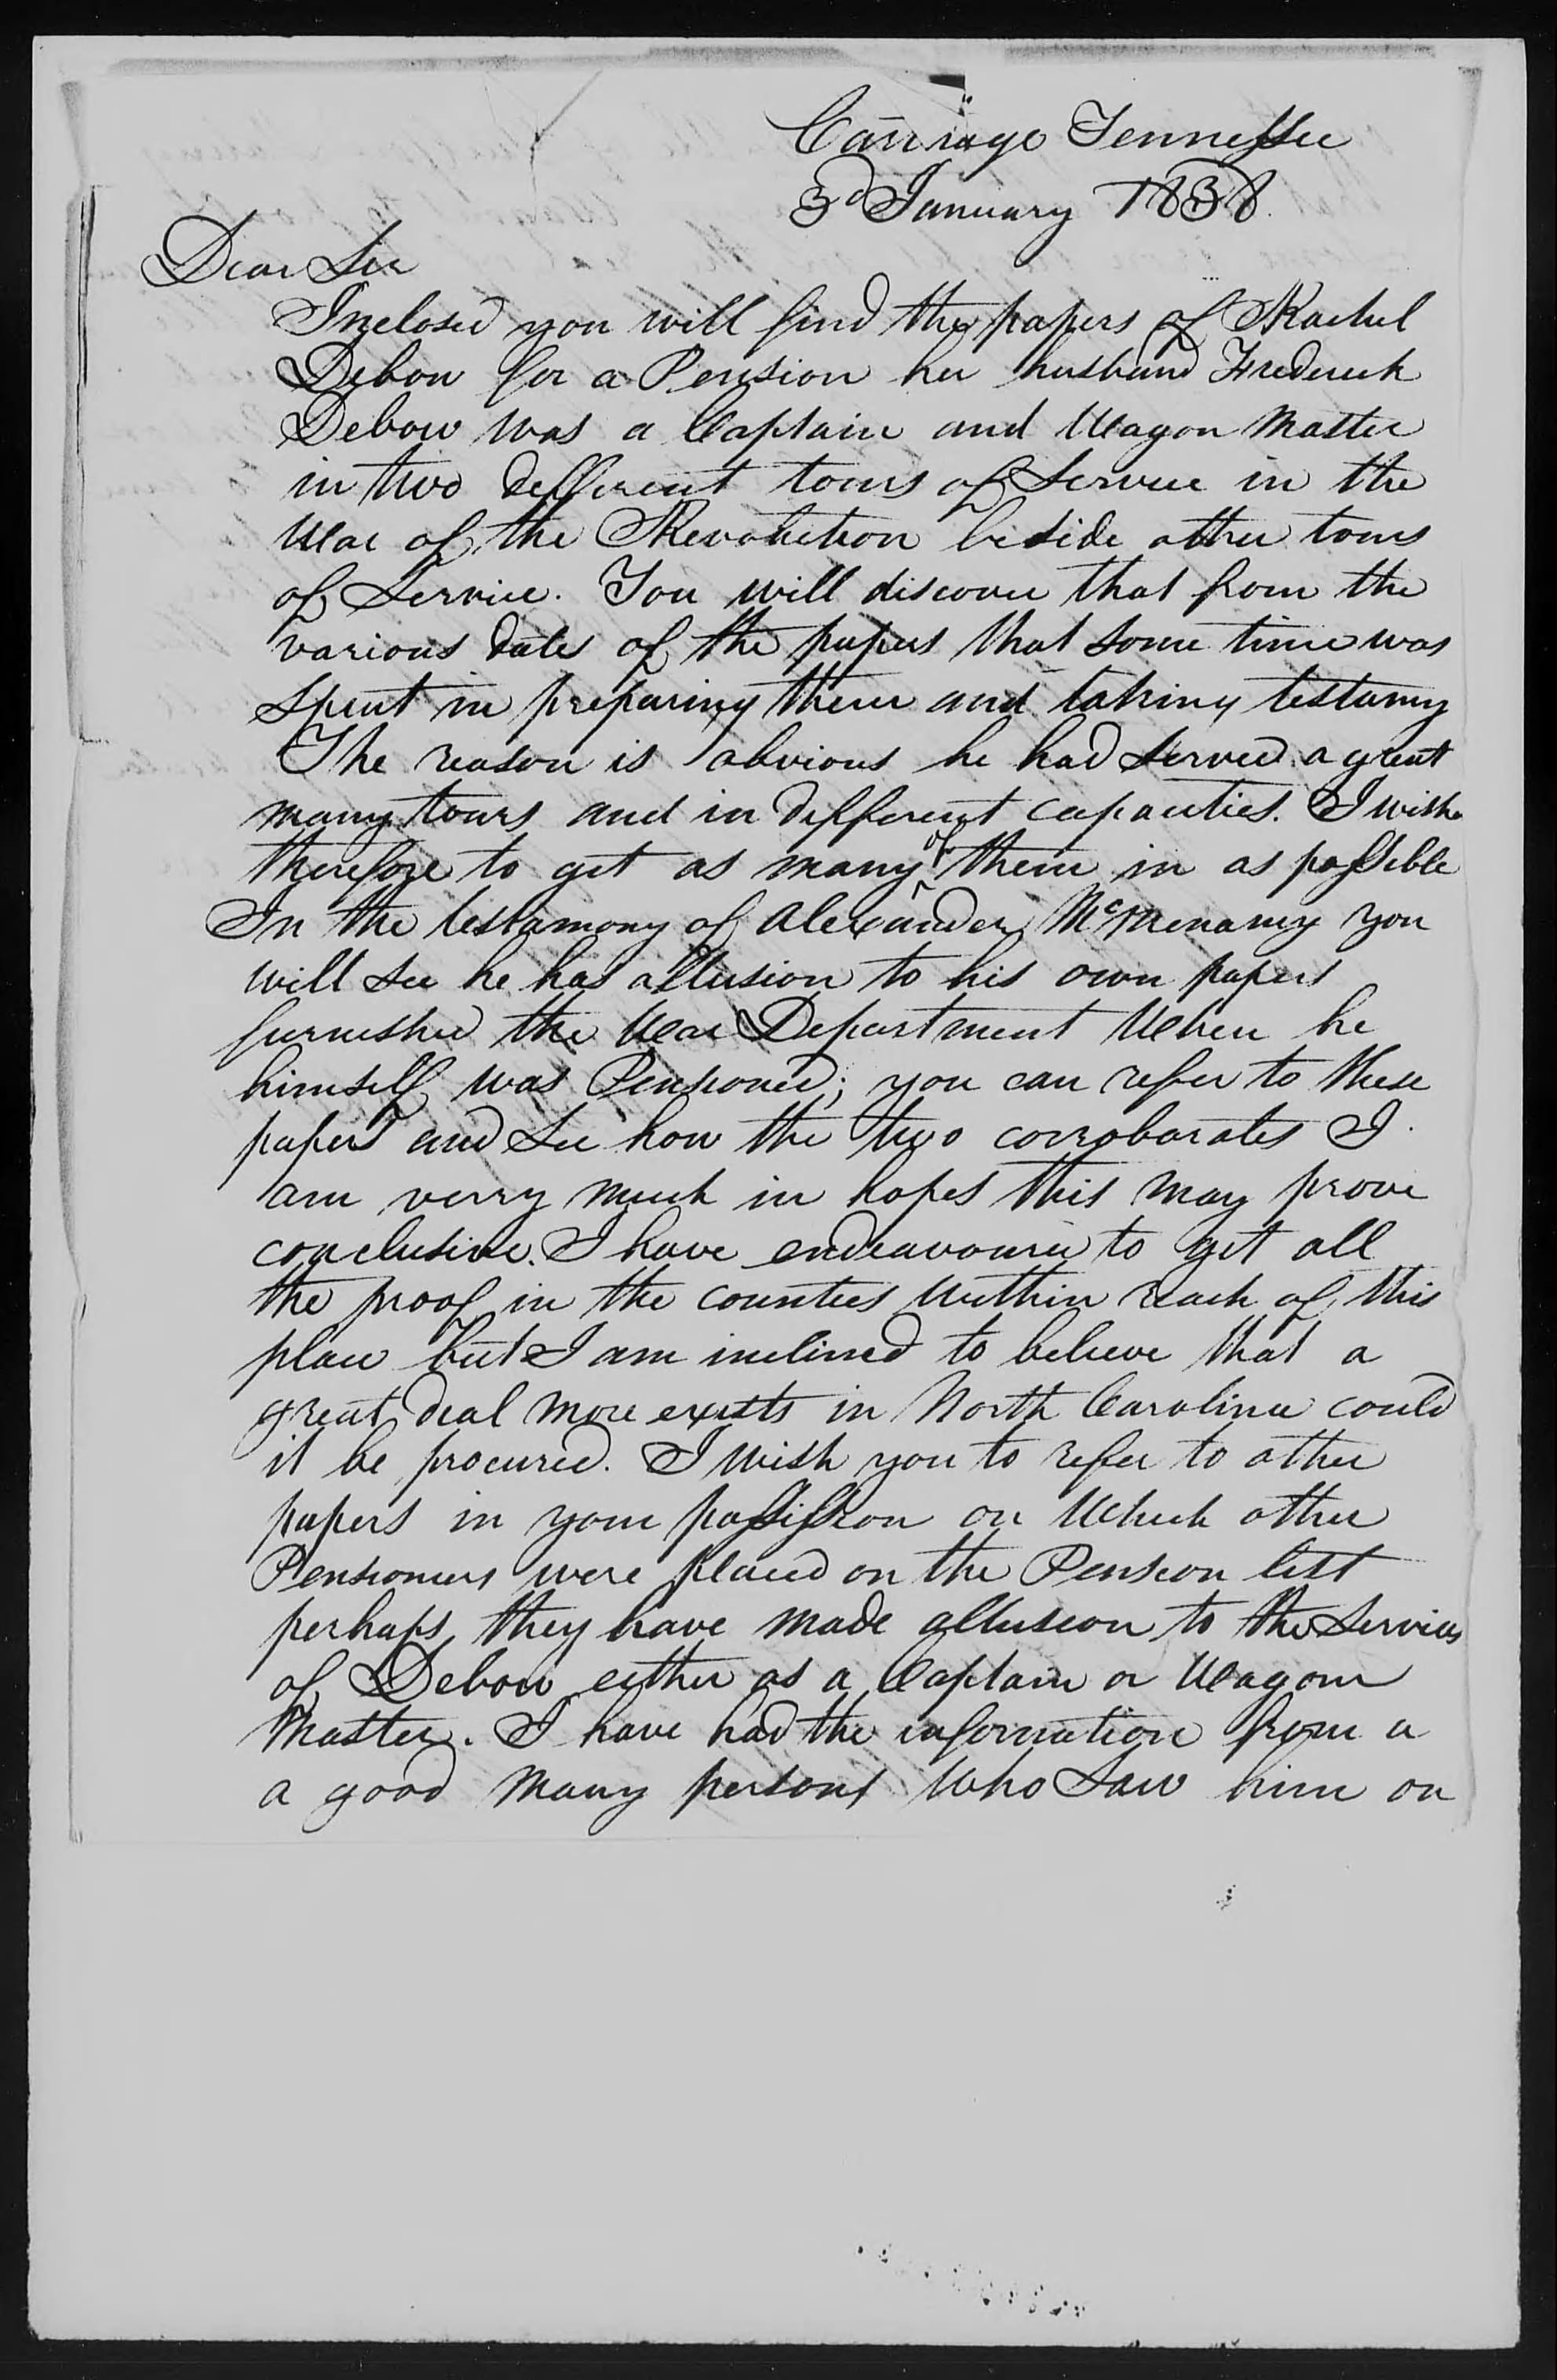 Letter from Adam Ferguson to James L. Edwards, 3 January 1838, page 1